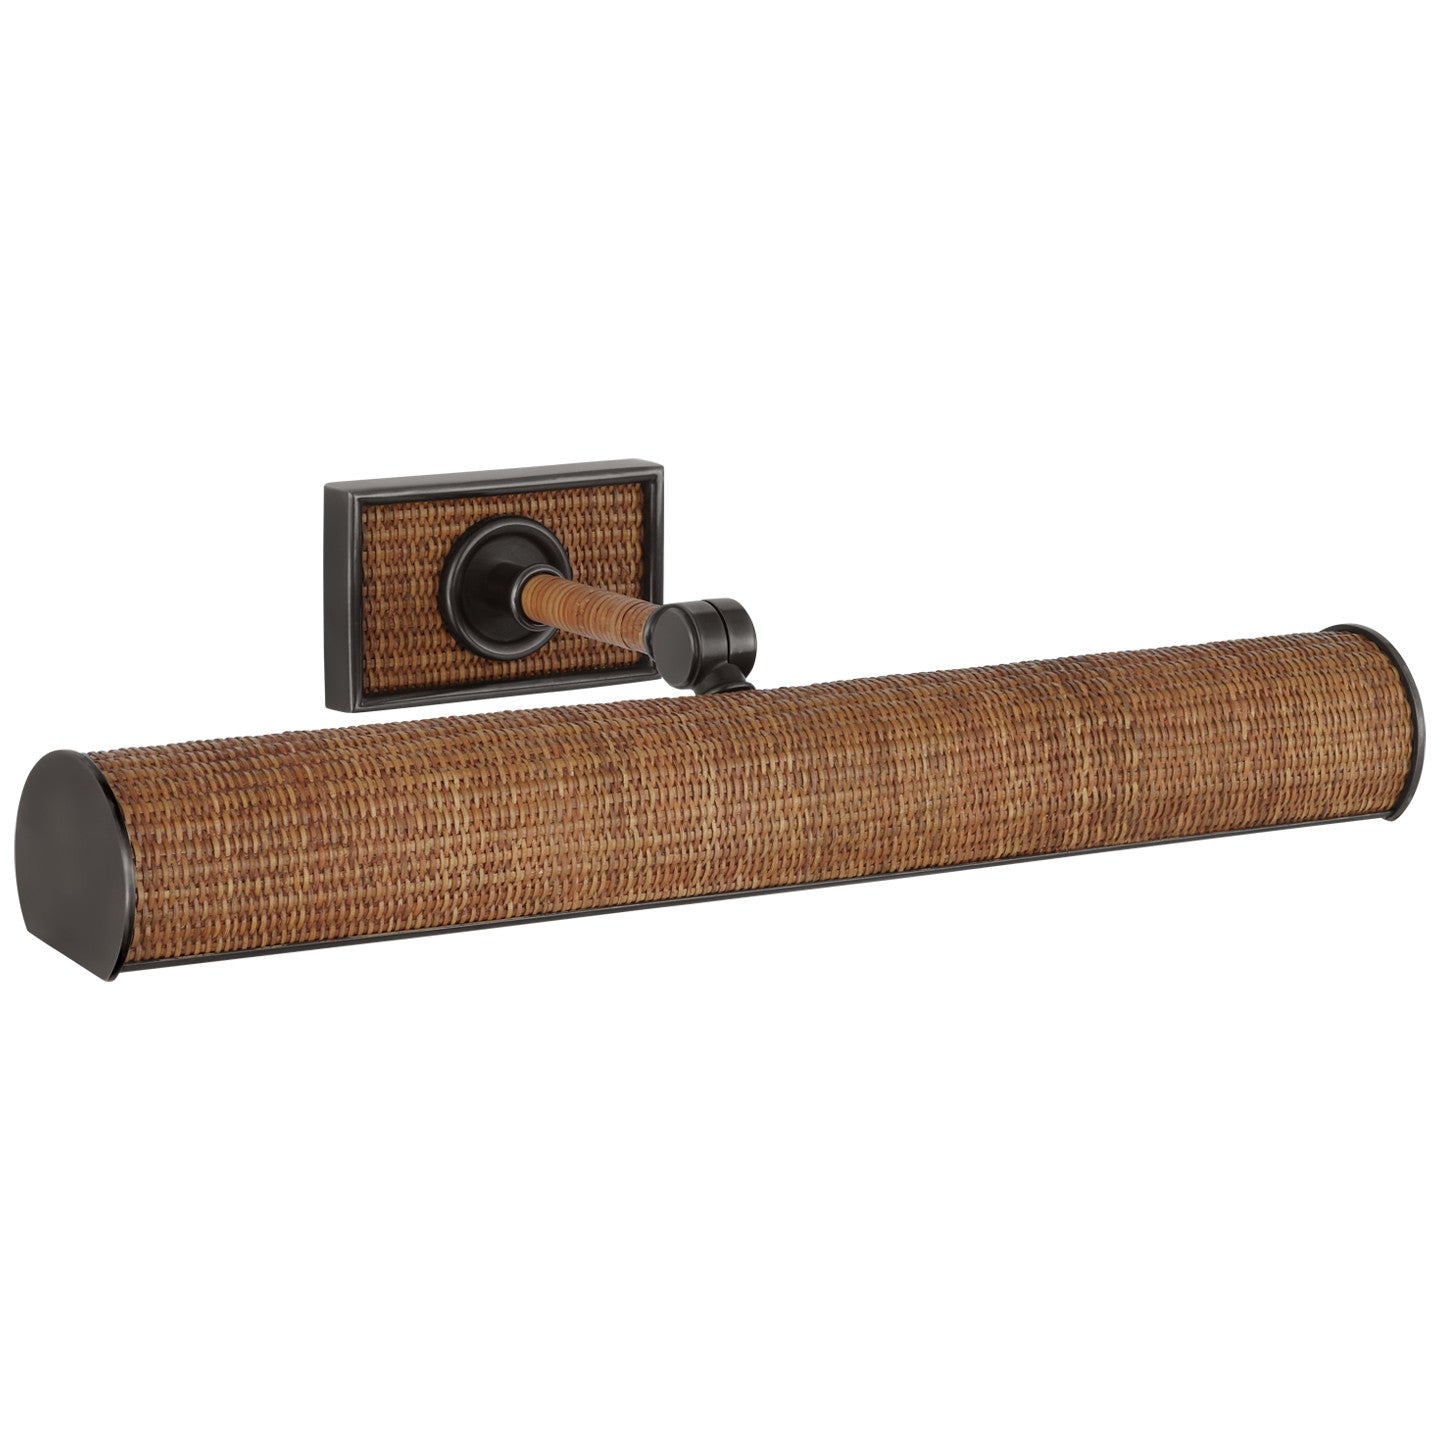 Visual Comfort Signature - CHD 2583BZ/NRT - LED Picture Light - Halwell - Bronze and Natural Woven Rattan